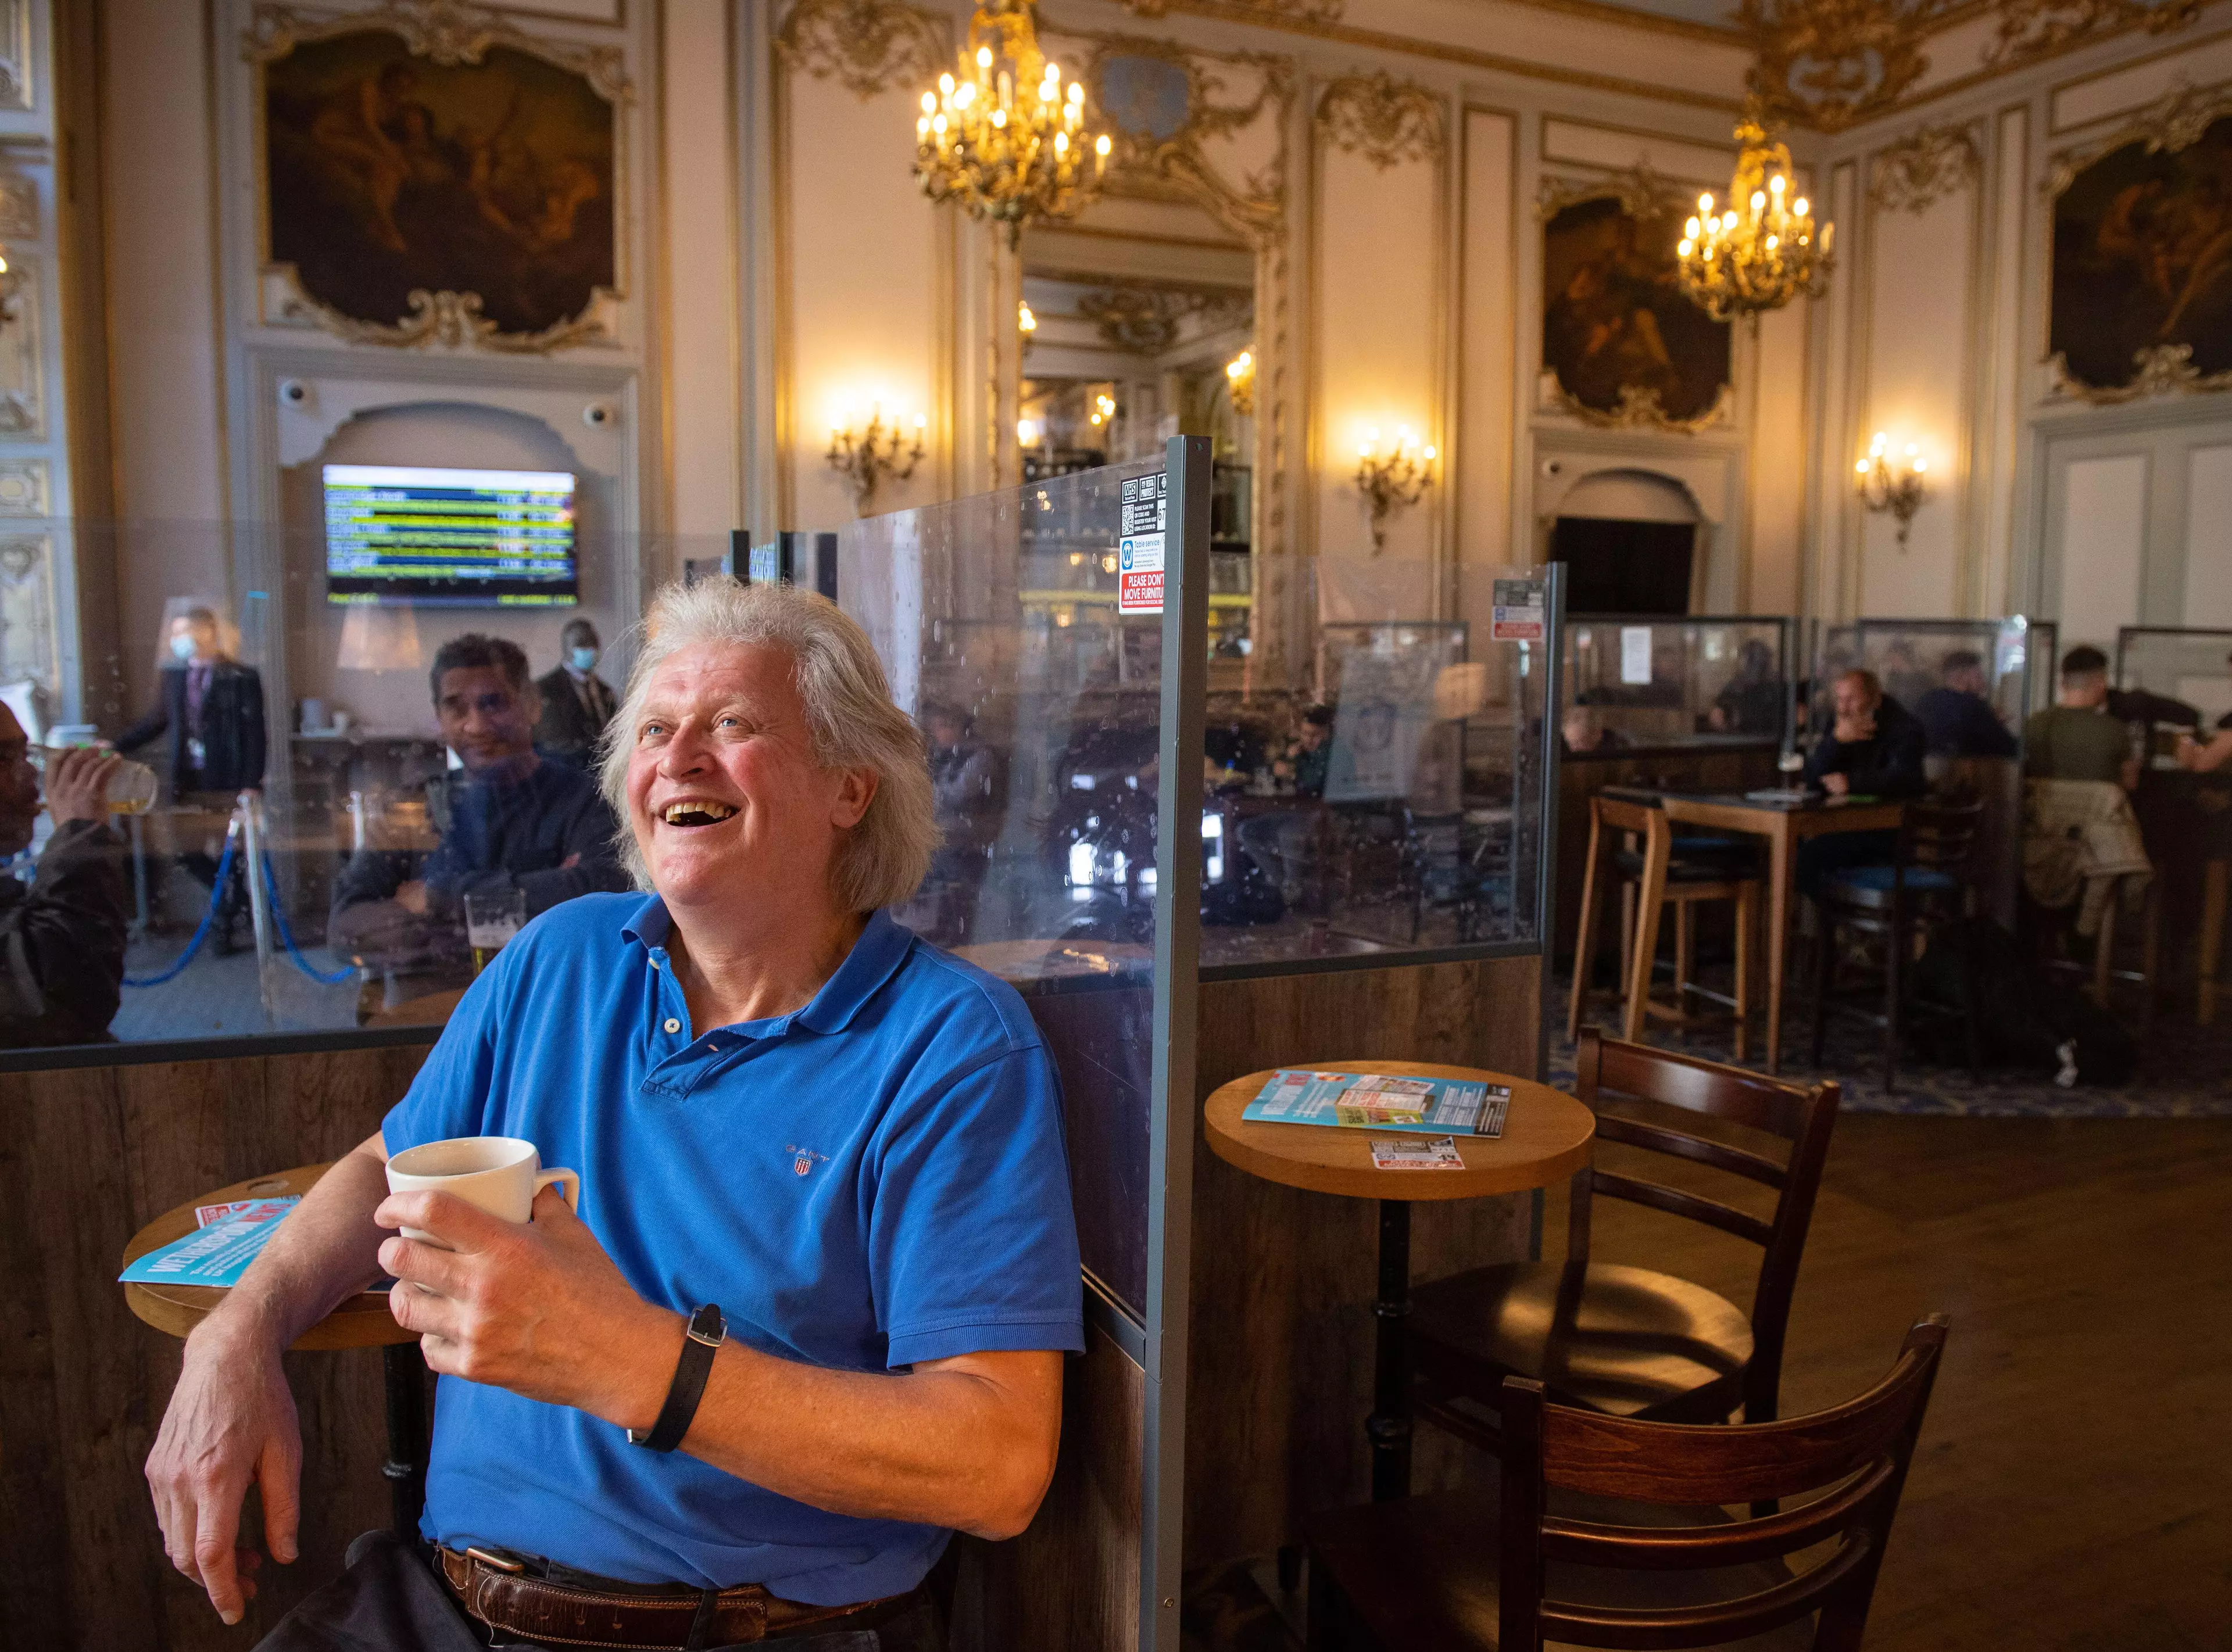 Tim Martin owns more than 870 Wetherspoon pubs.